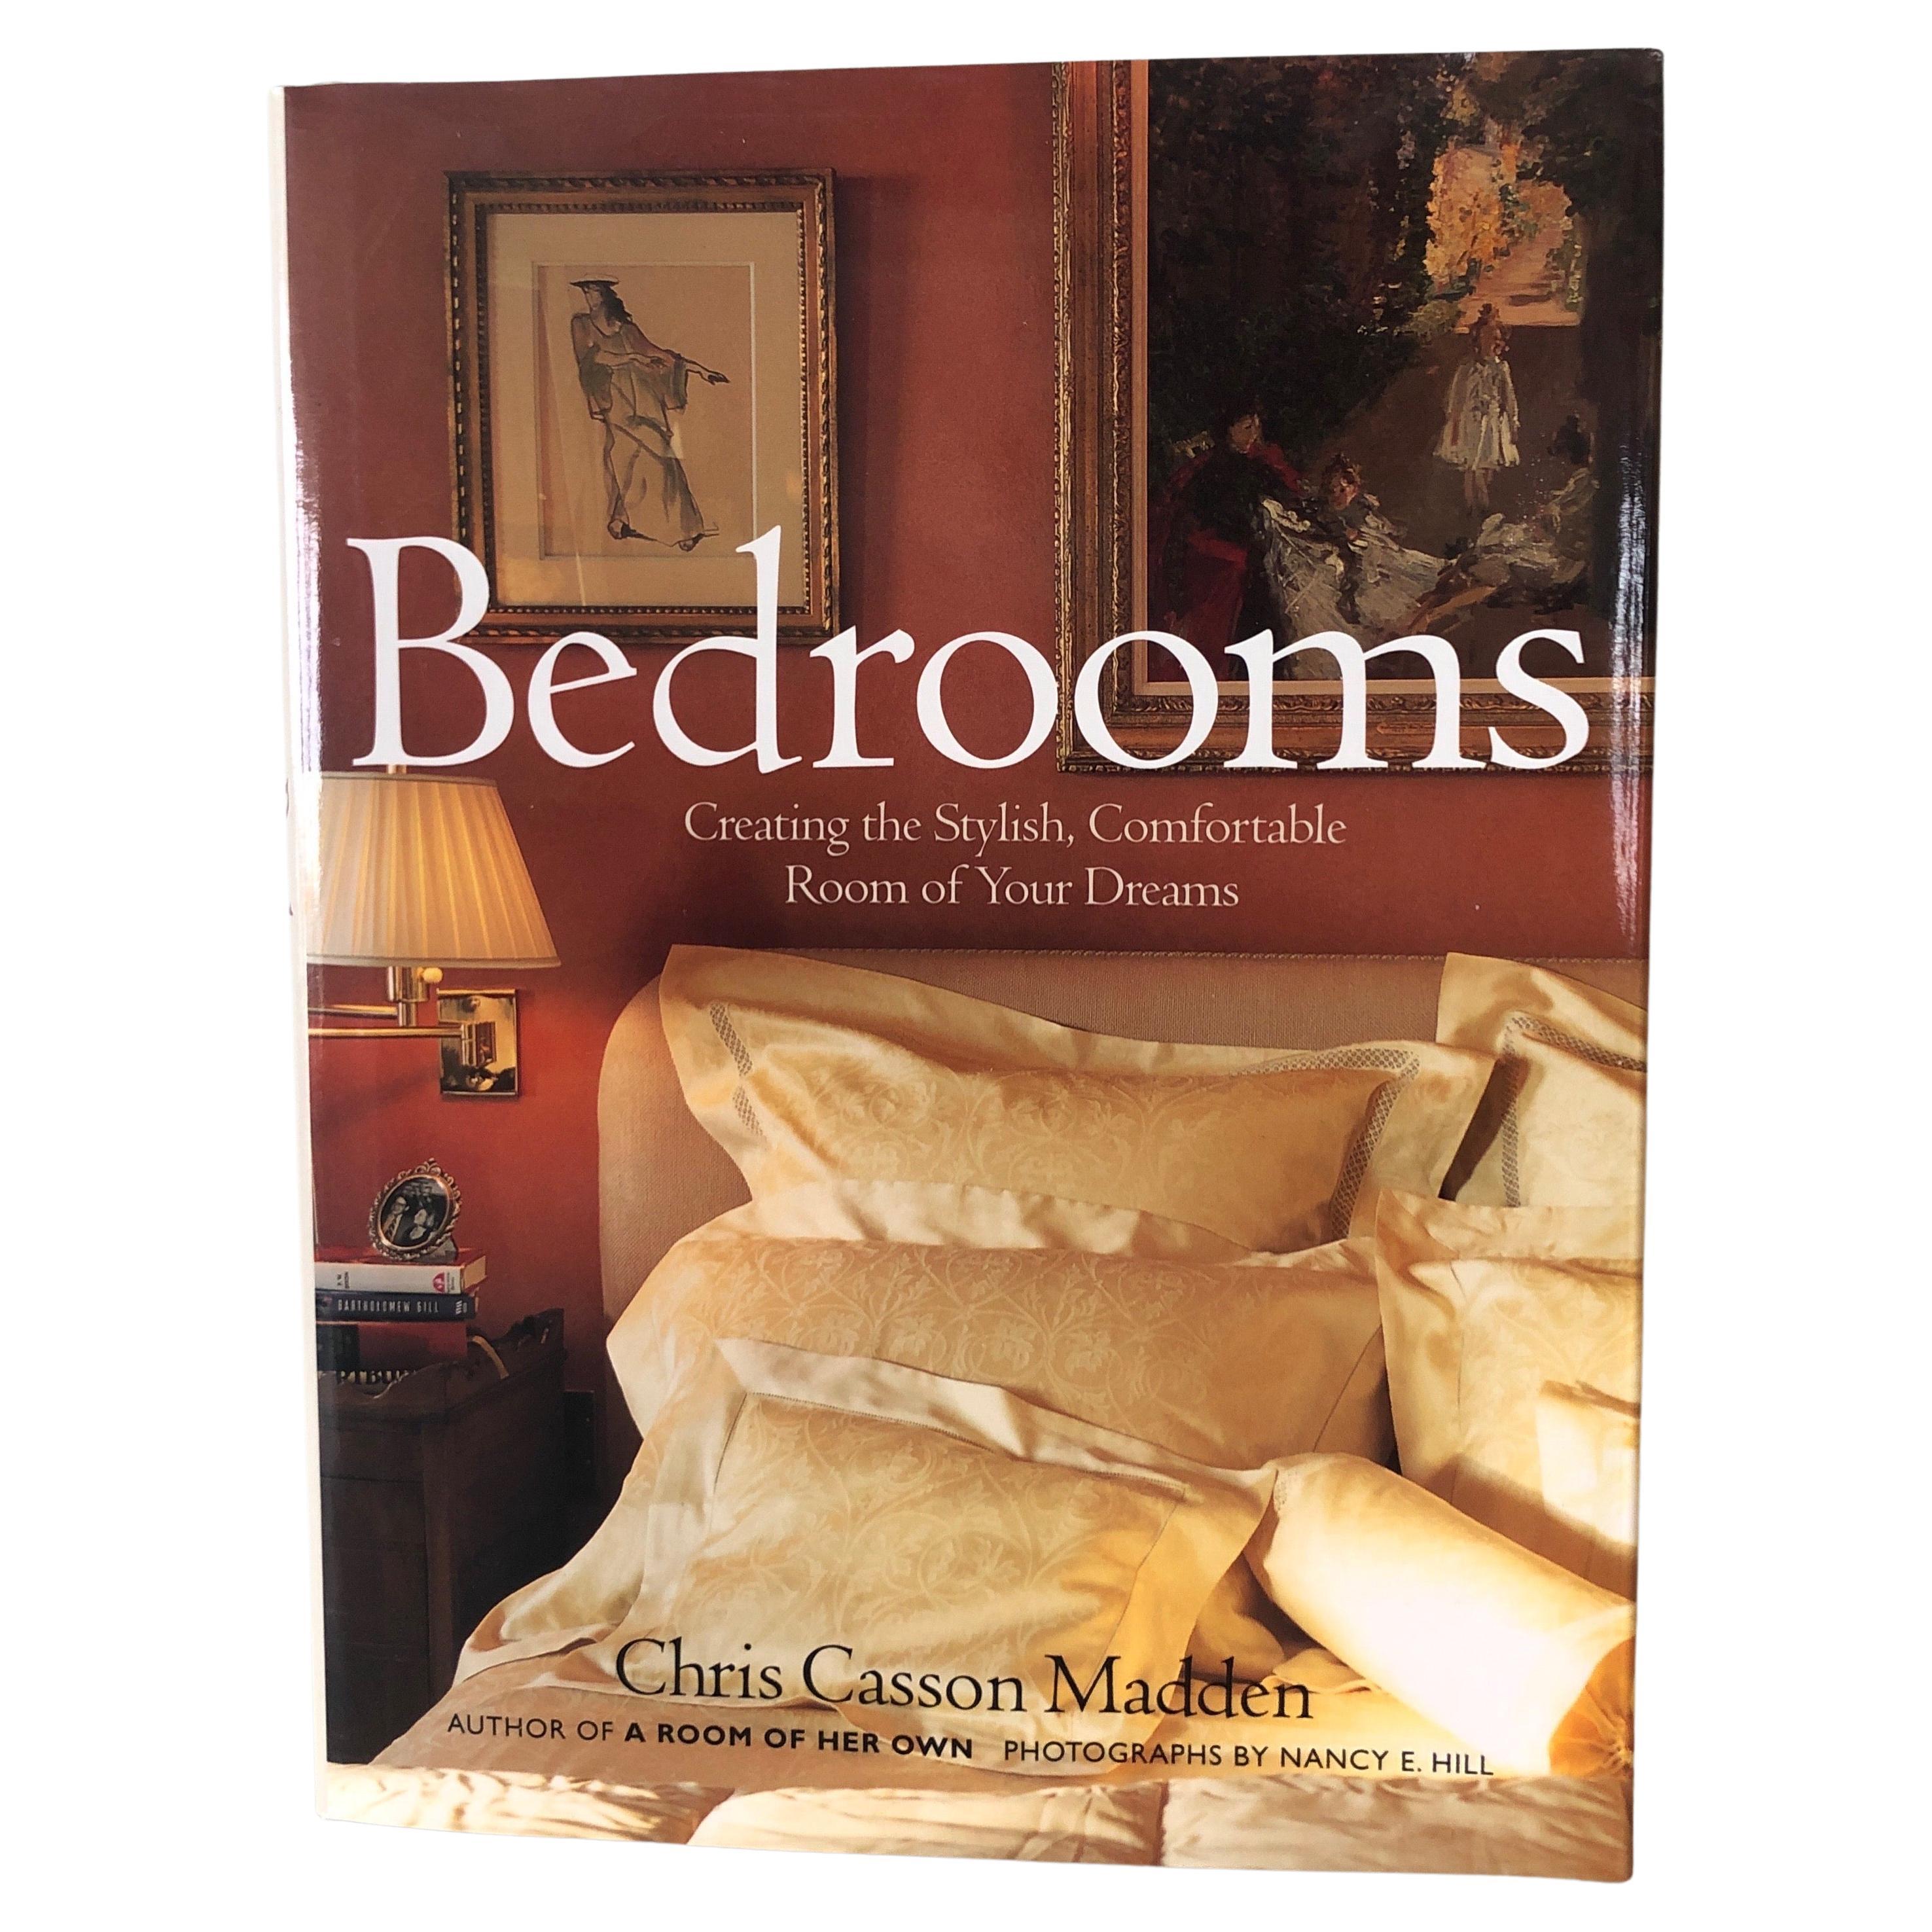 Bedrooms: Creating the Stylish, Comfortable Room of Your Dreams Hardcover Book